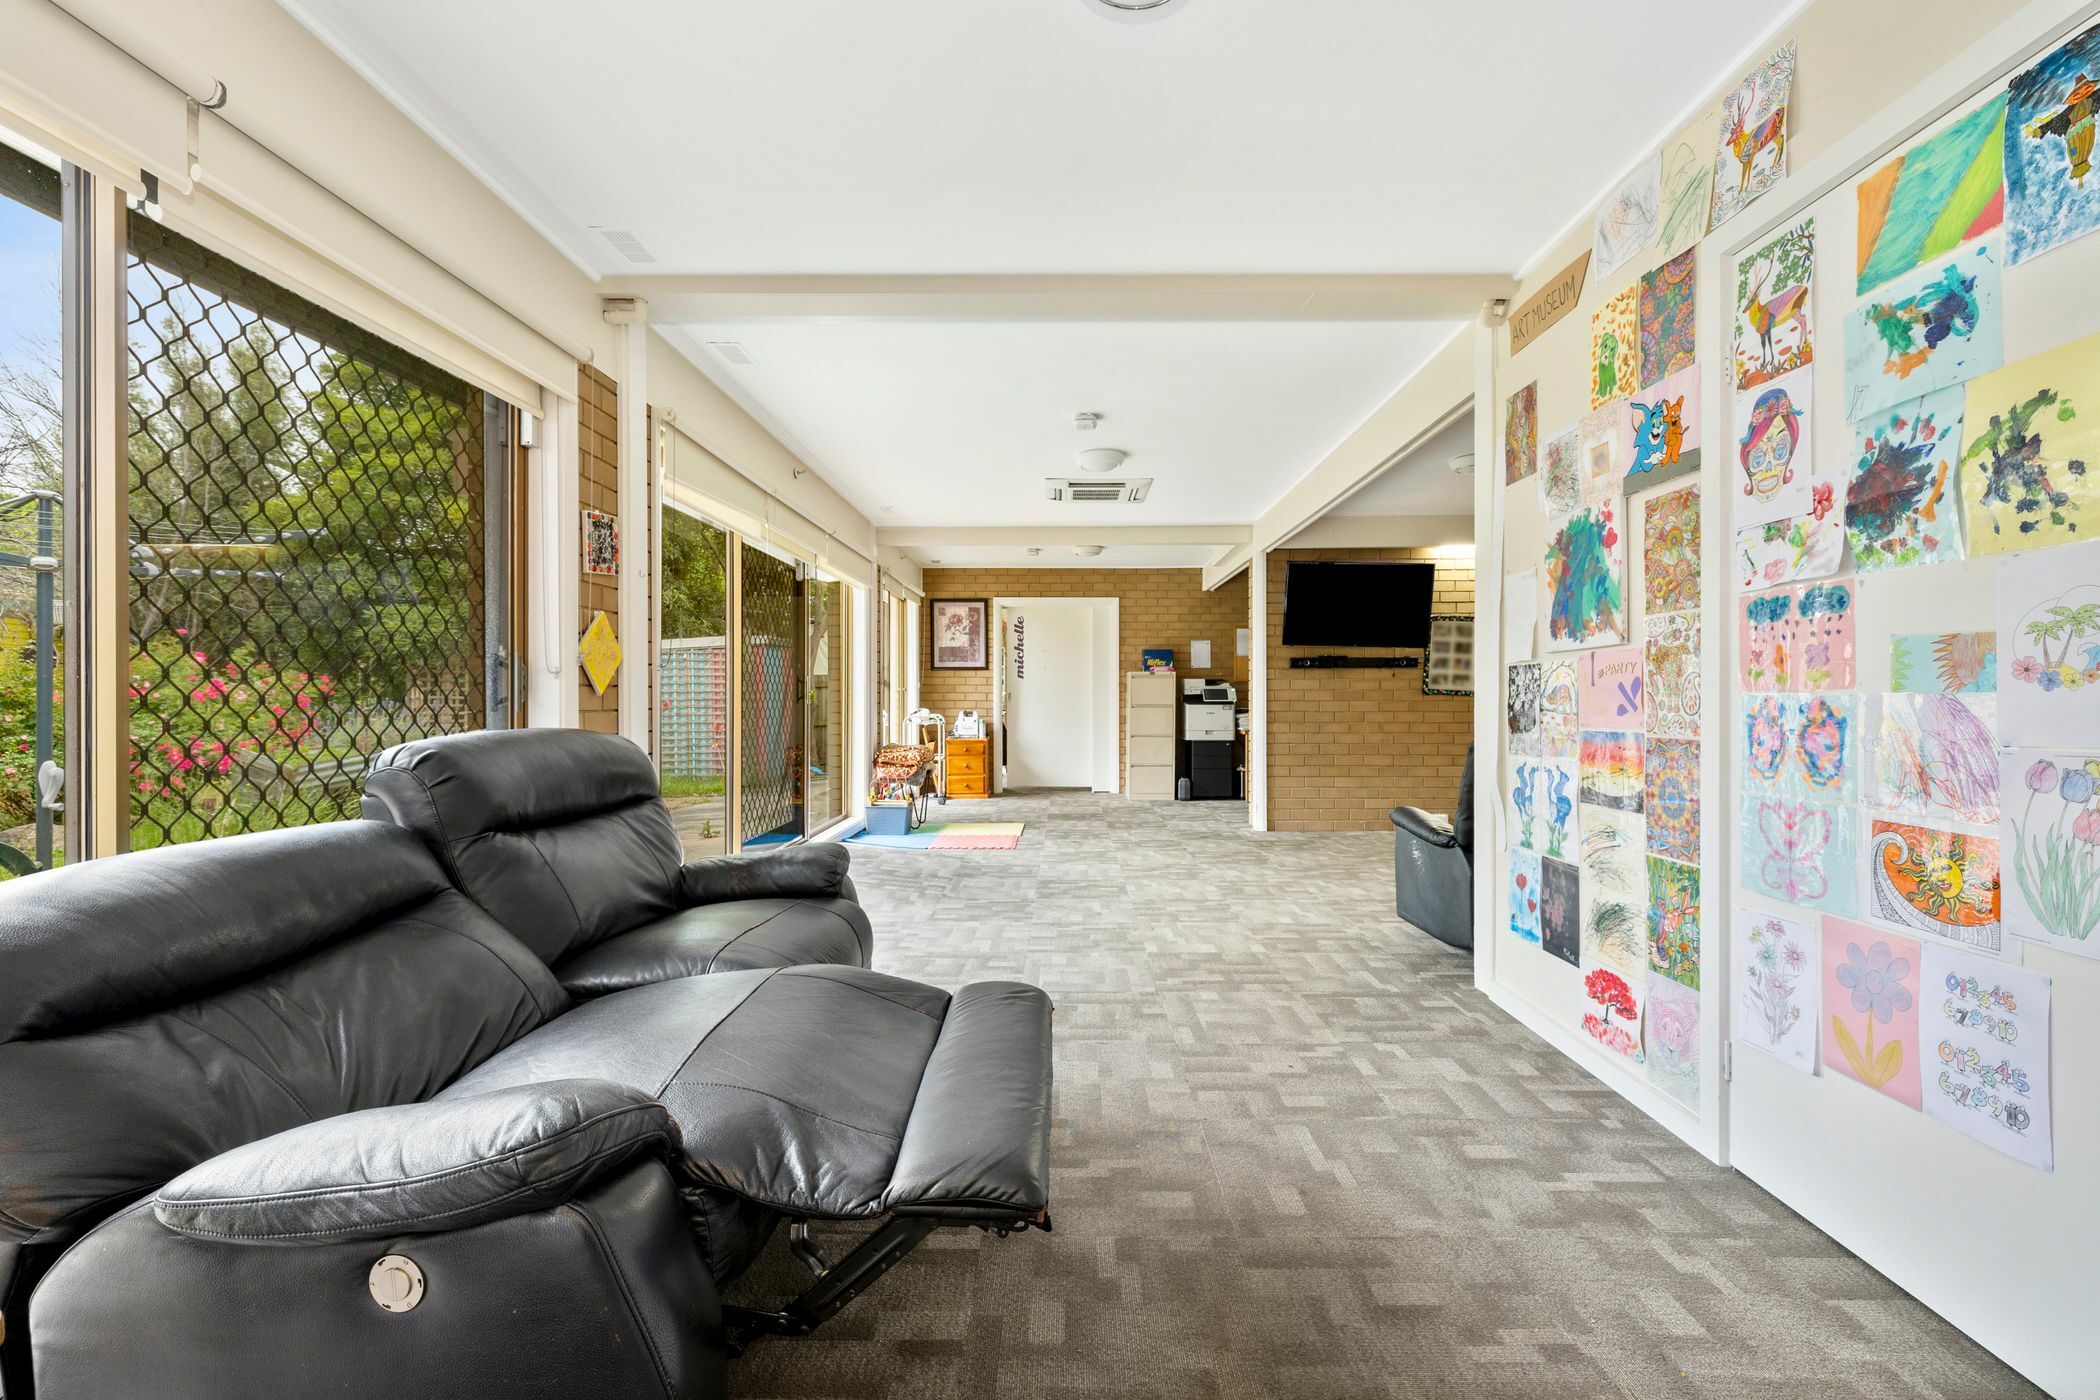 Living area with artwork on wall